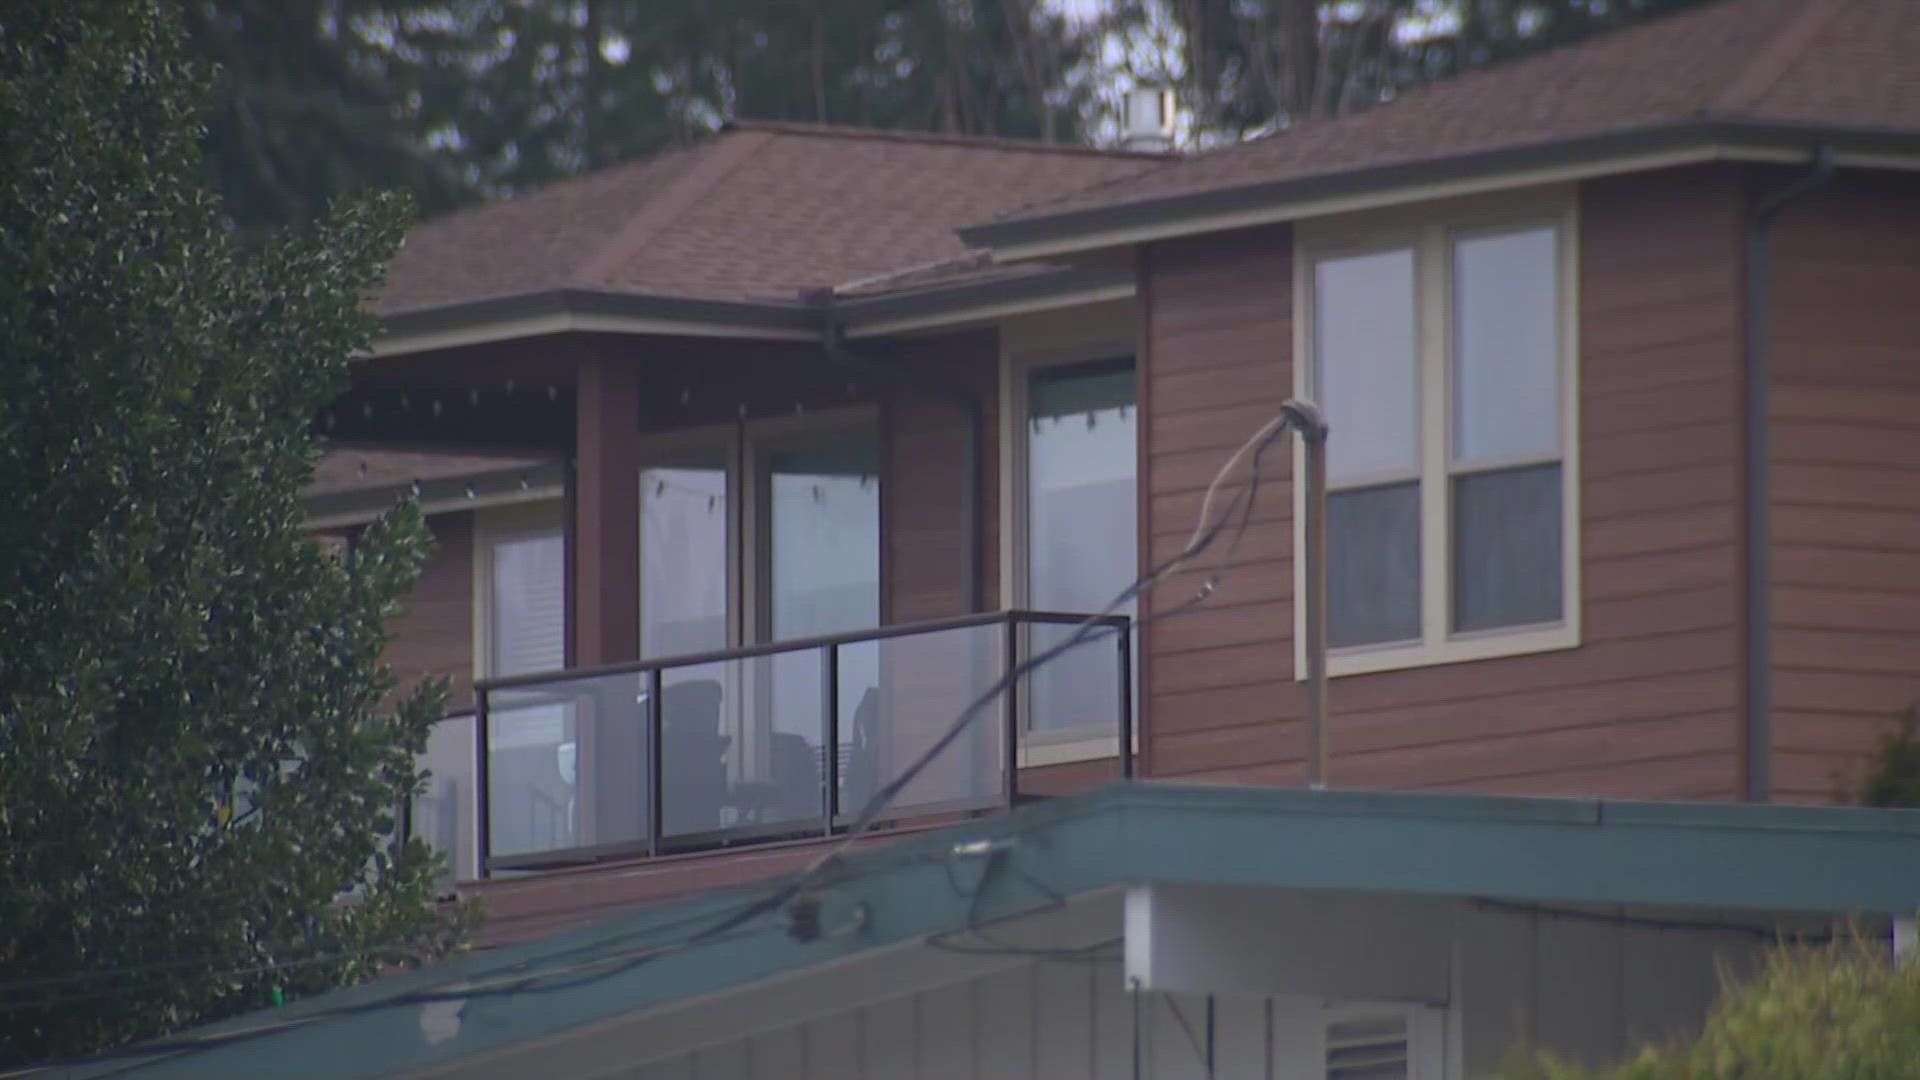 Gig Harbor’s city council passed an ordinance outlining how short-term rentals would operate in the city.